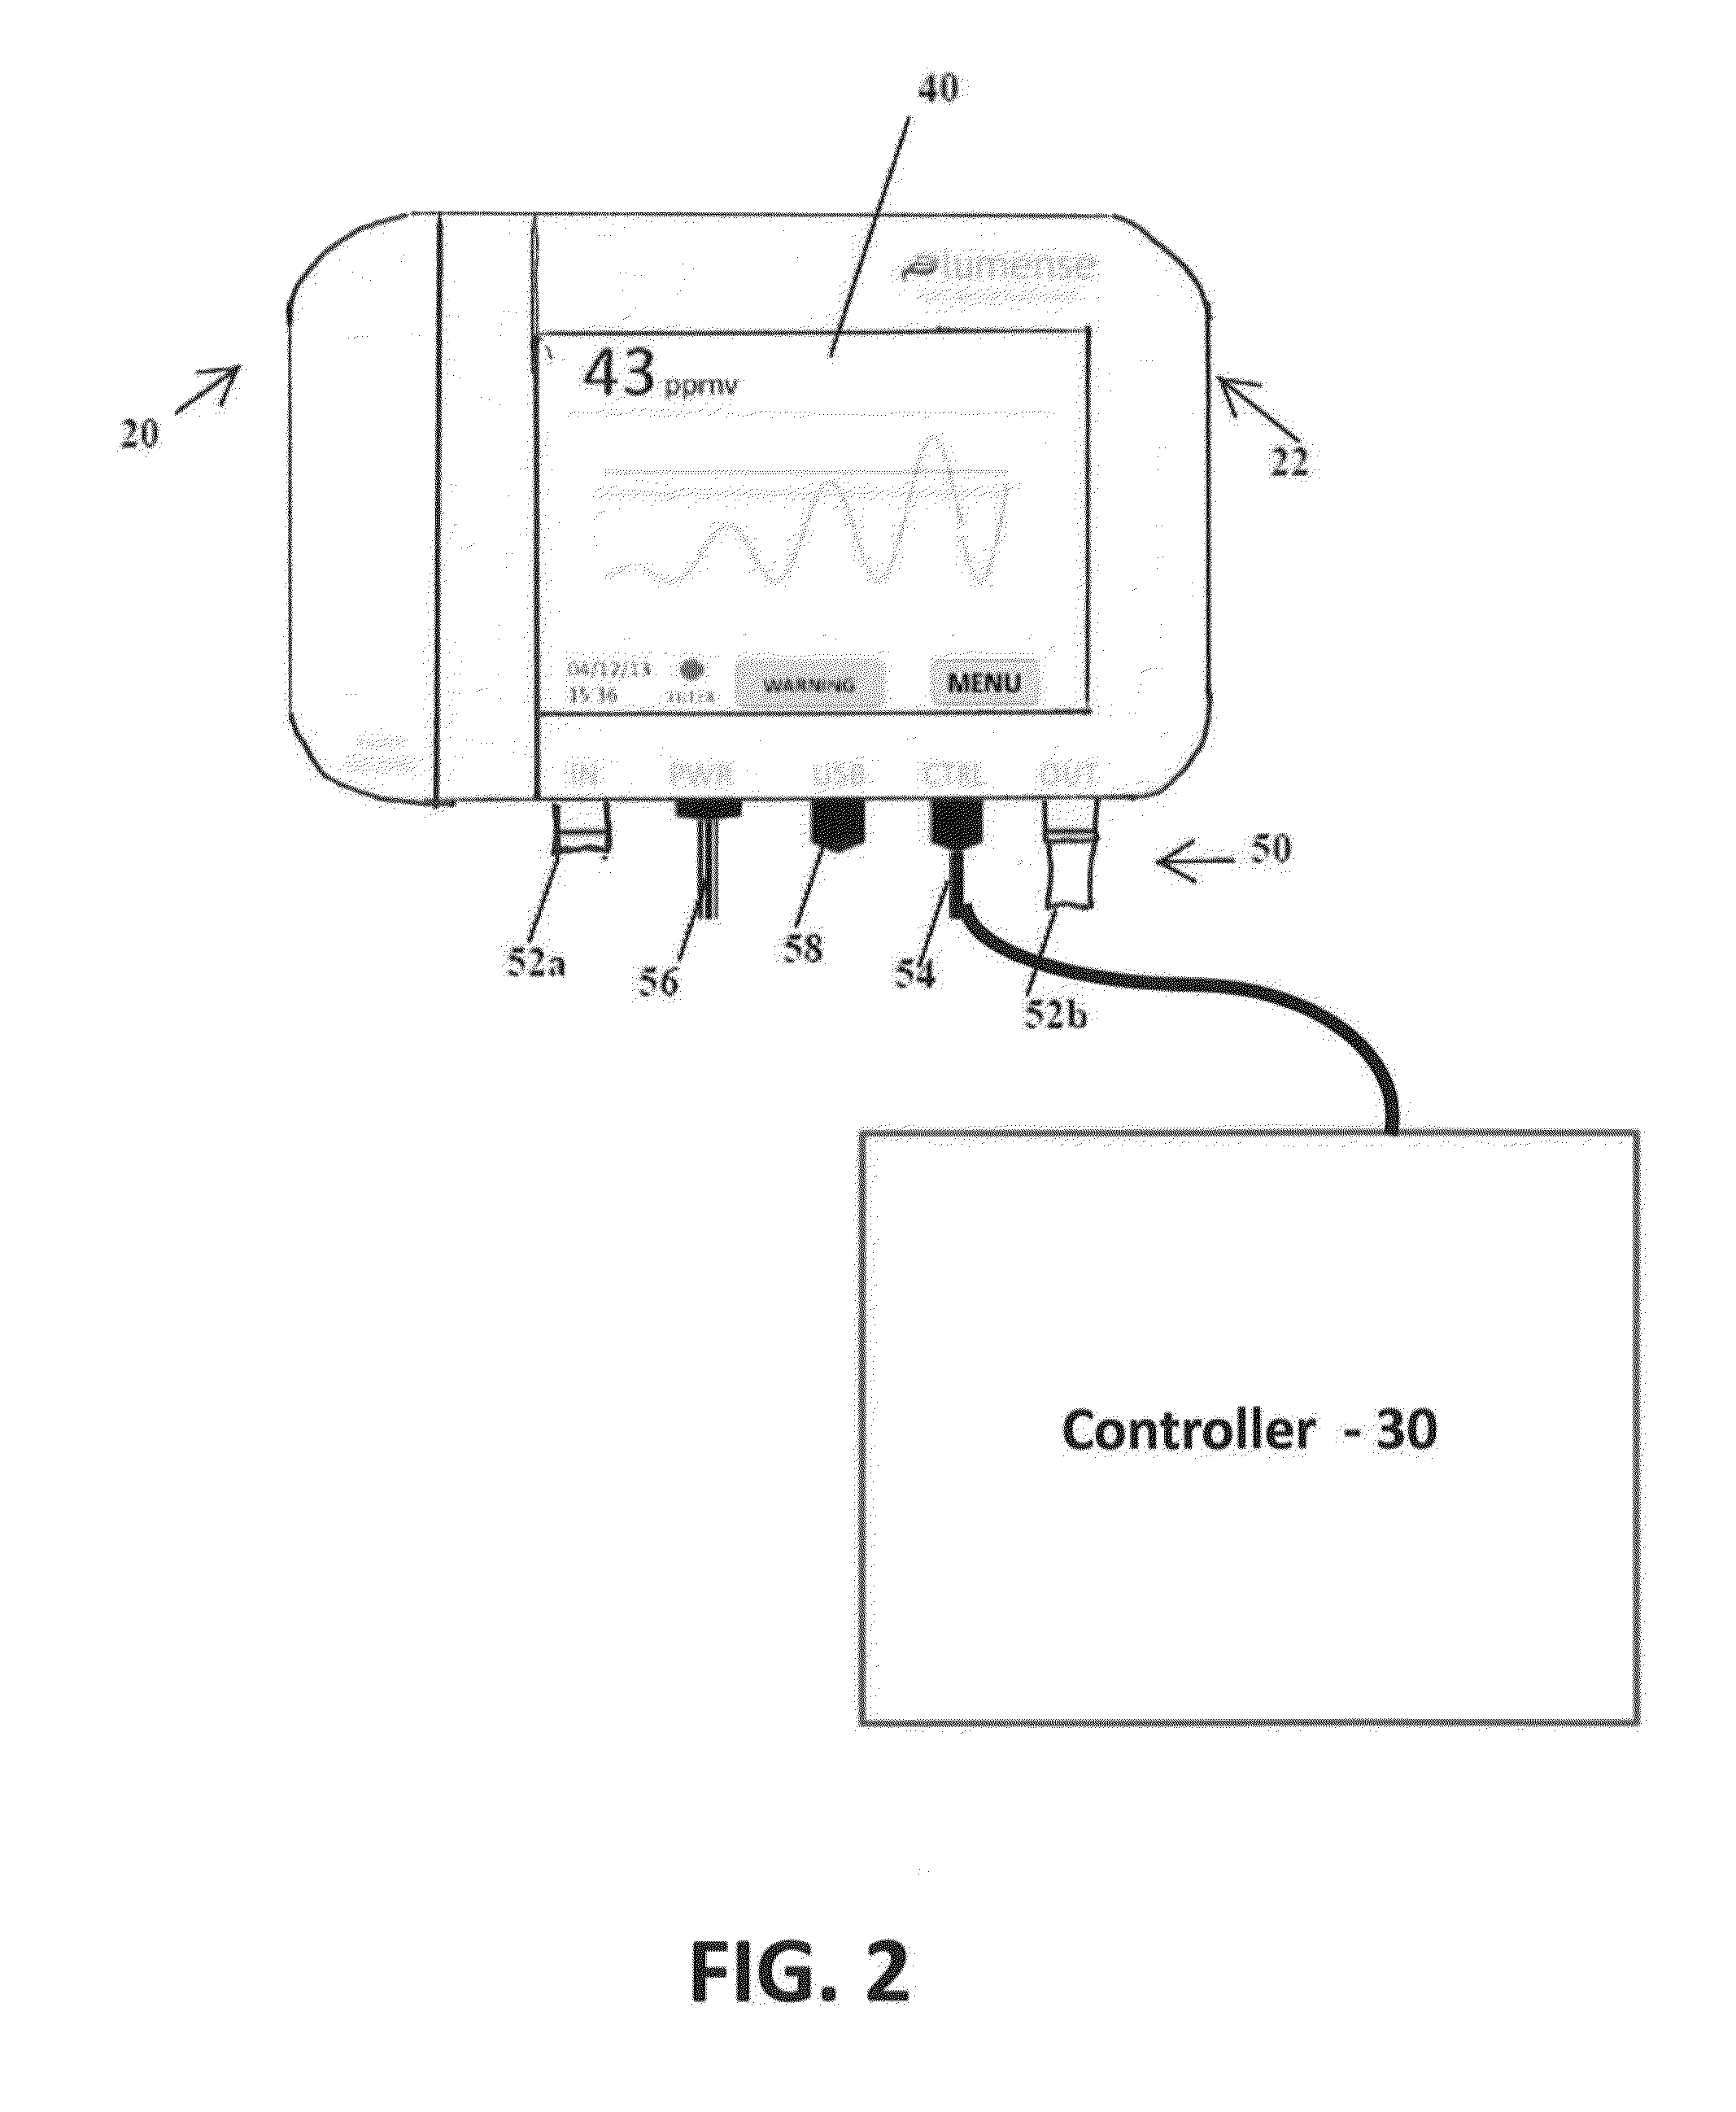 System and Method for Sensing Ammonia